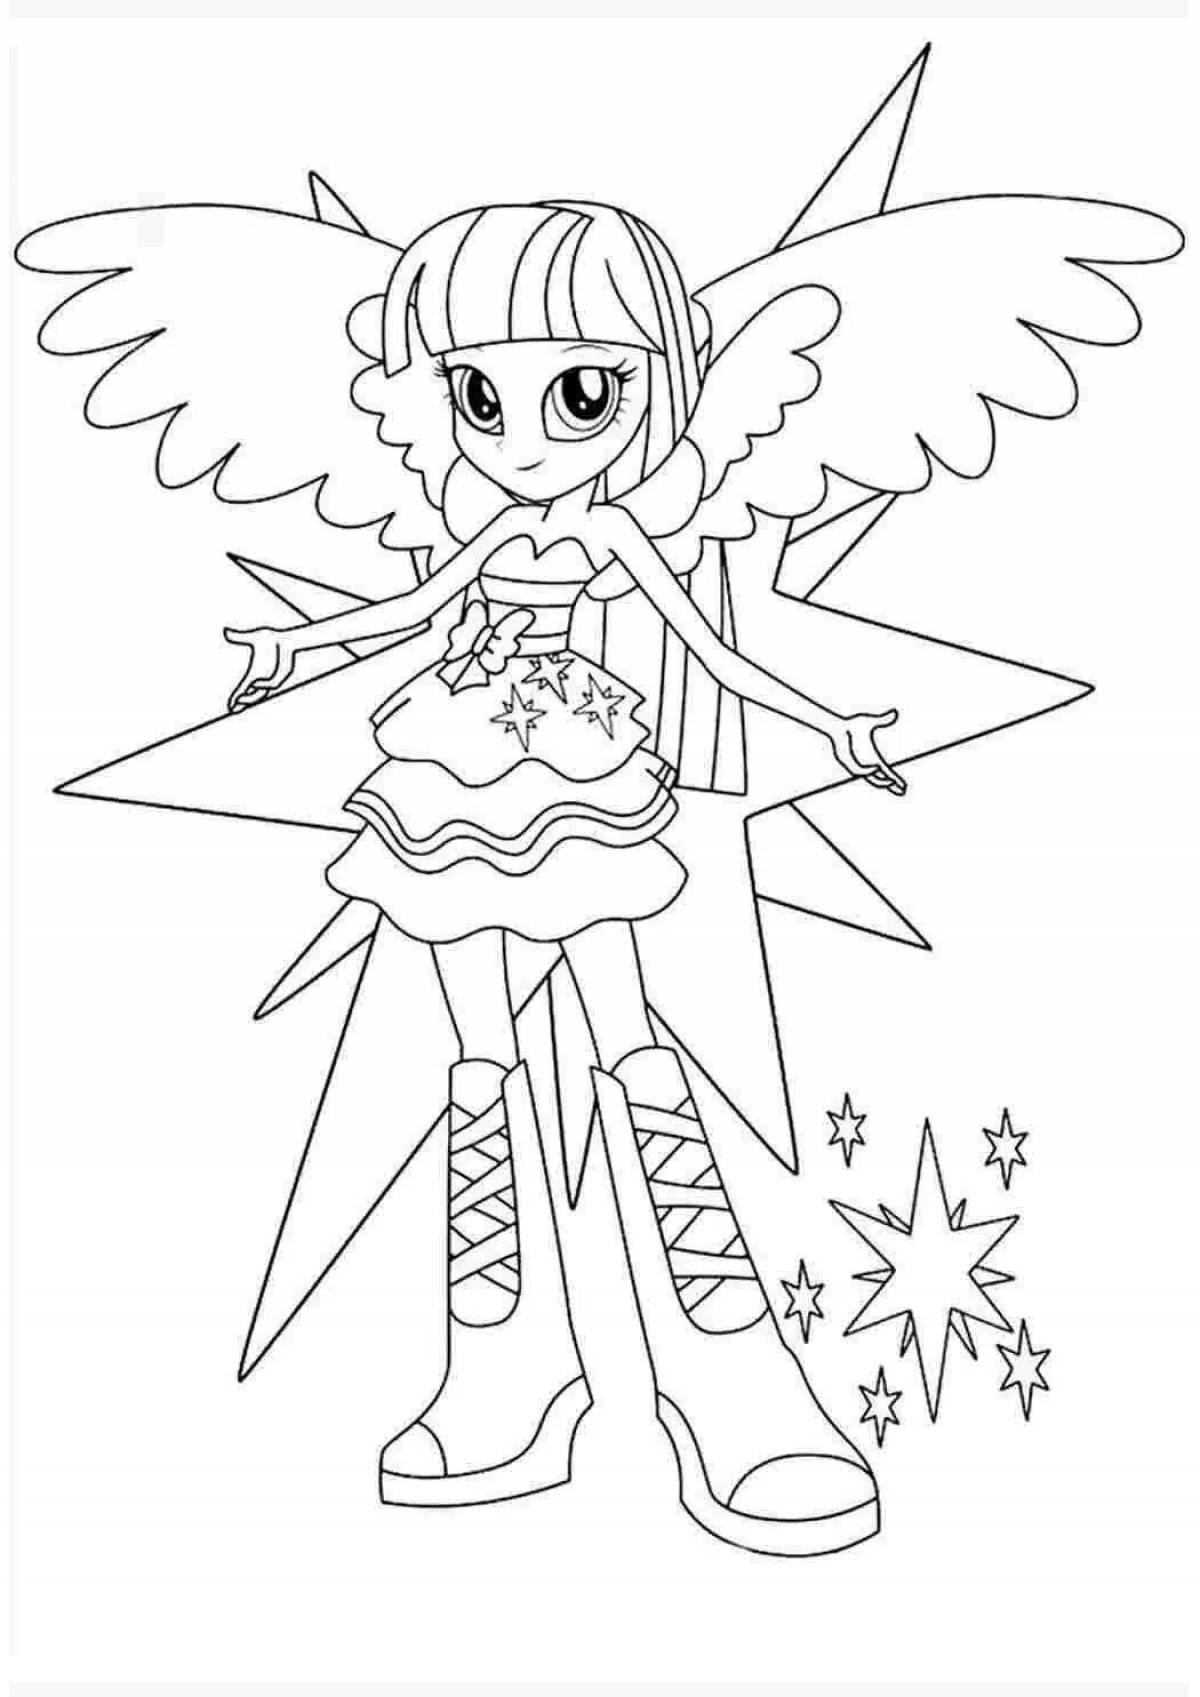 Colorful equestria girls coloring pages